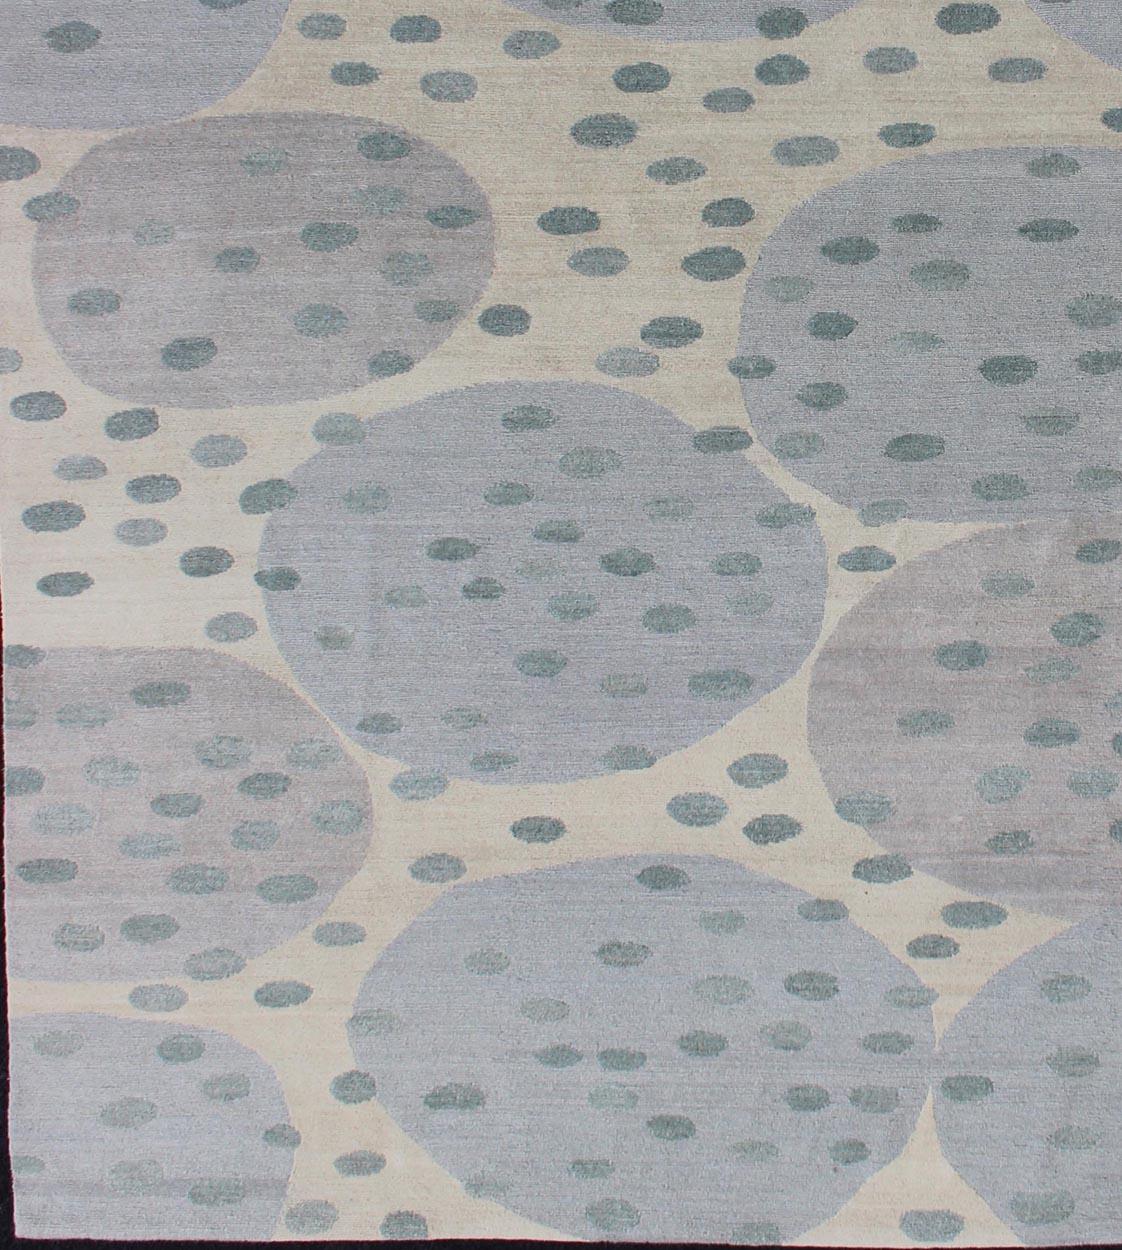 Nepalese Modern rug in light tones, rug 19-0819, country of origin / type: Nepal / Modern

This rug from Nepal was woven with wool and silk and features a modern design of various circles and dots.
Measures: 8' x 10'.